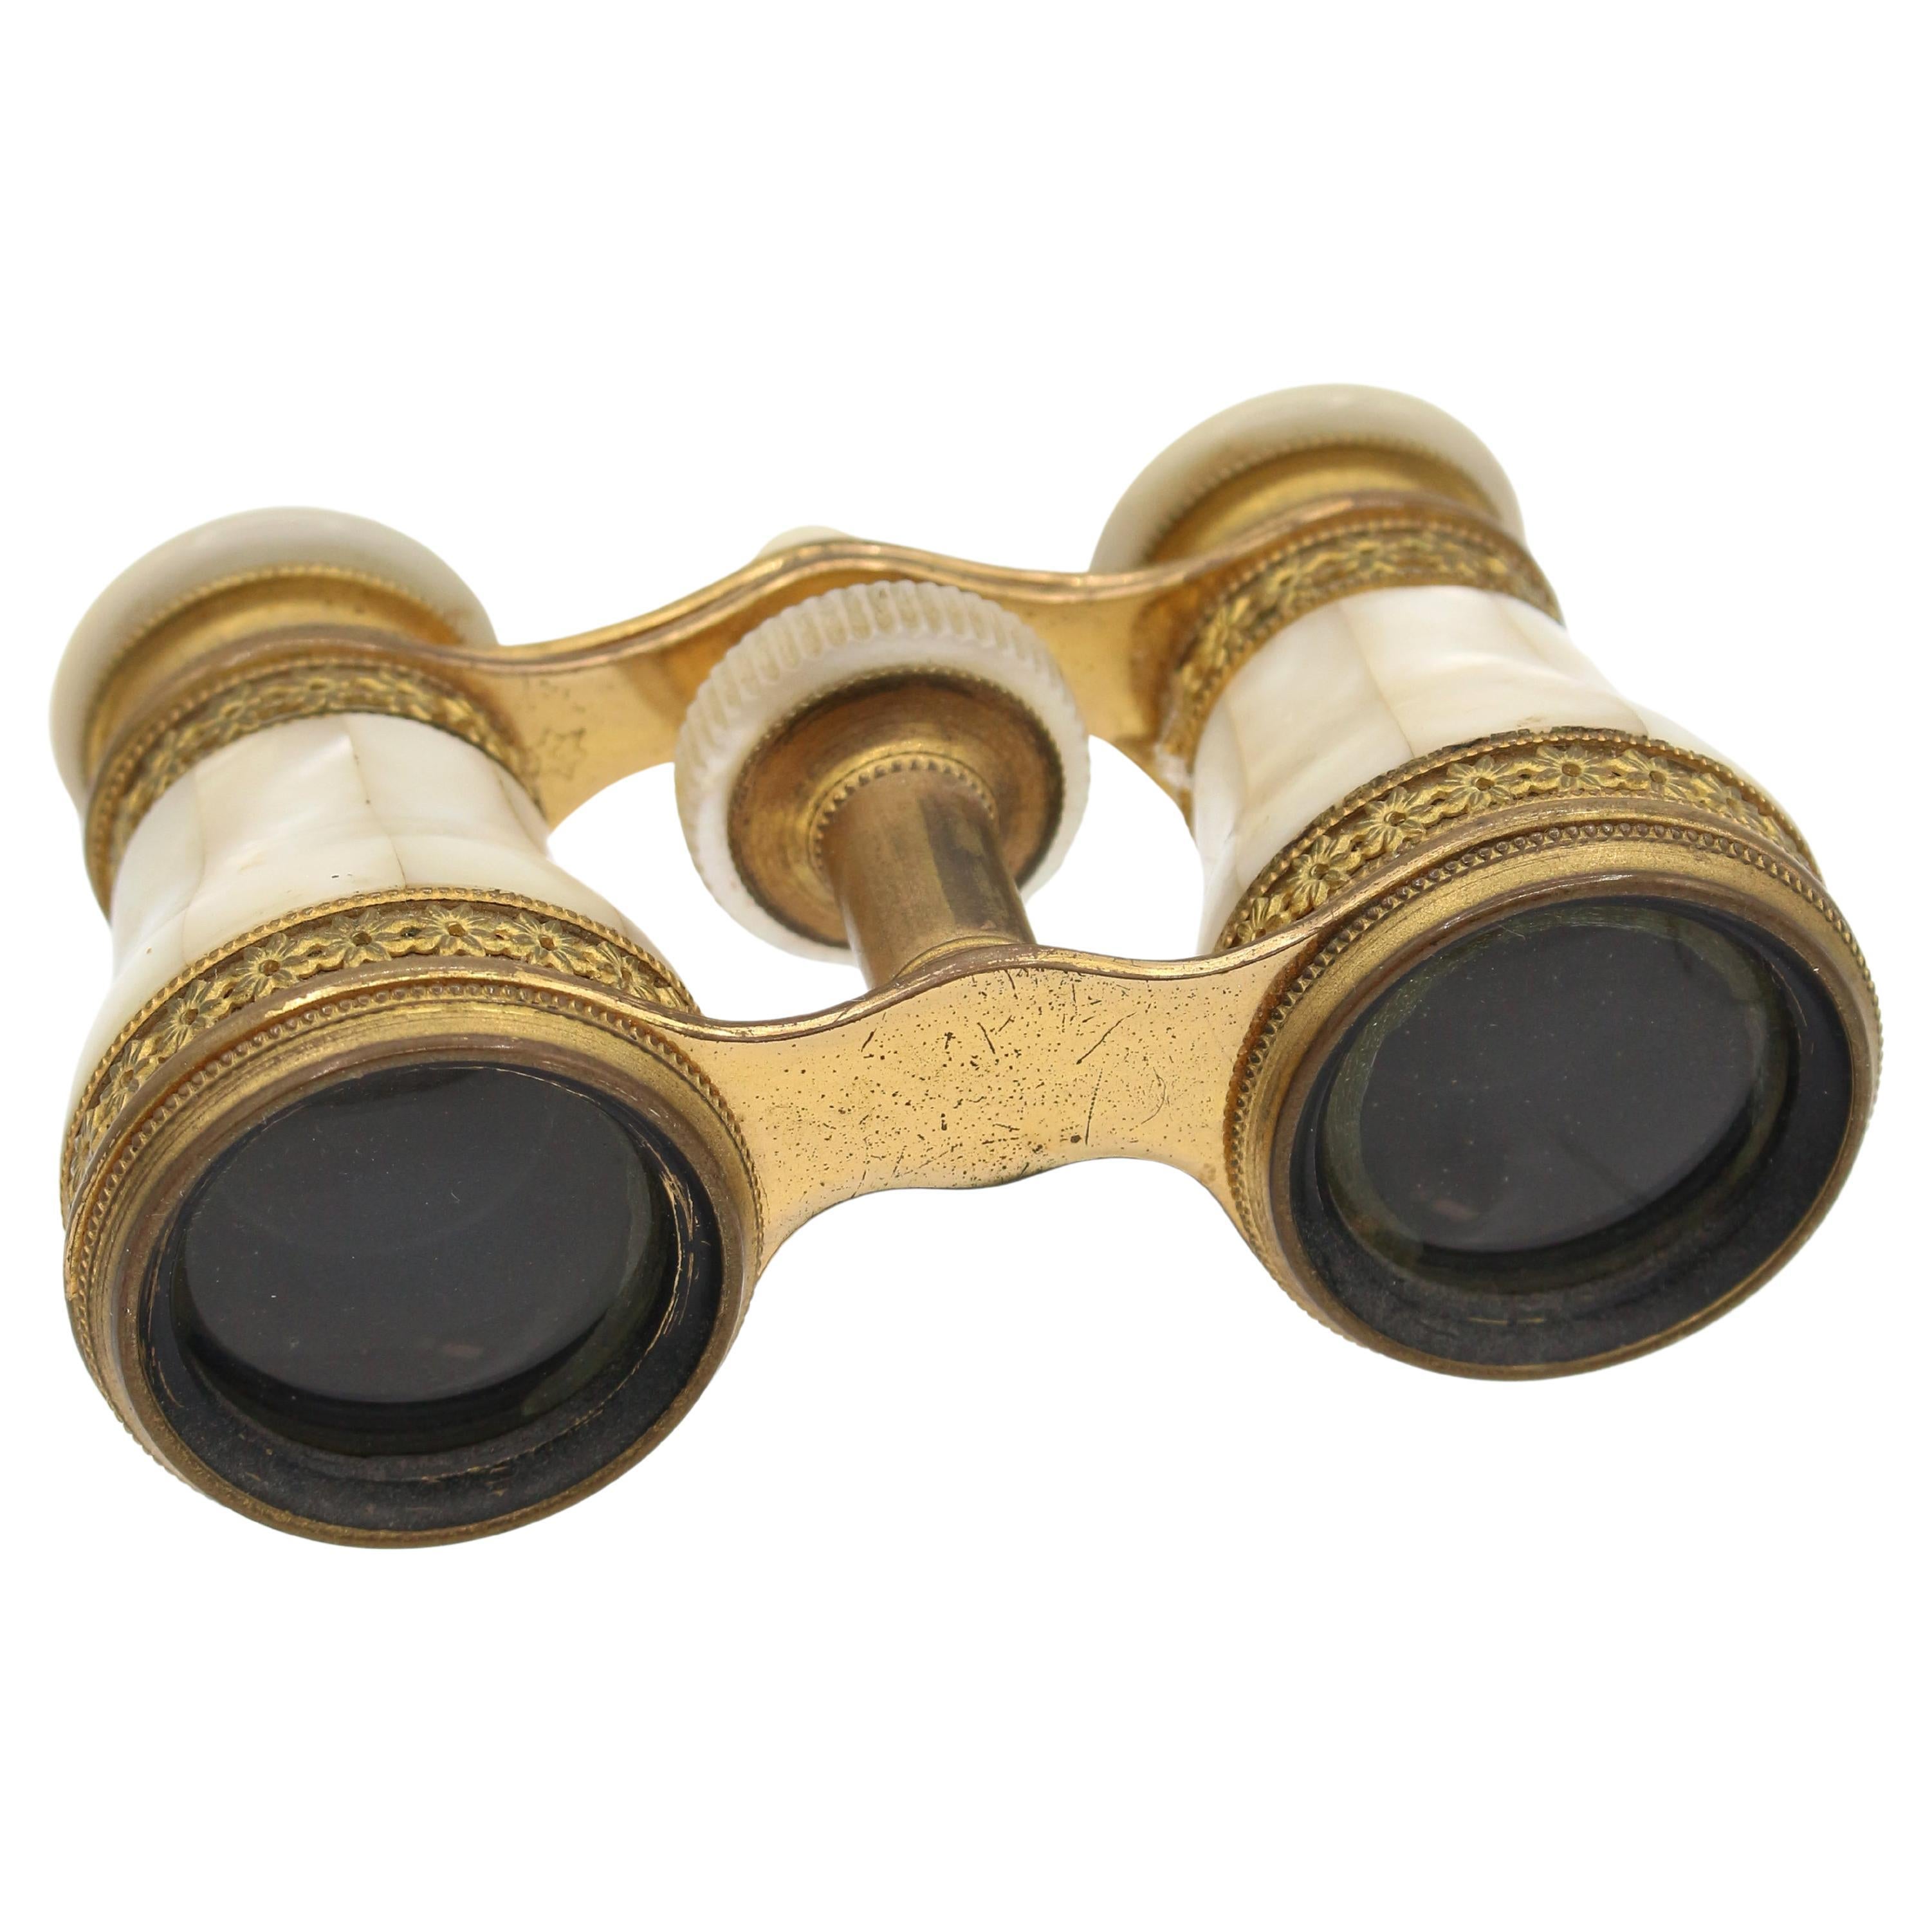 Circa 1900 French Opera Glasses by Colmont F.T Paris